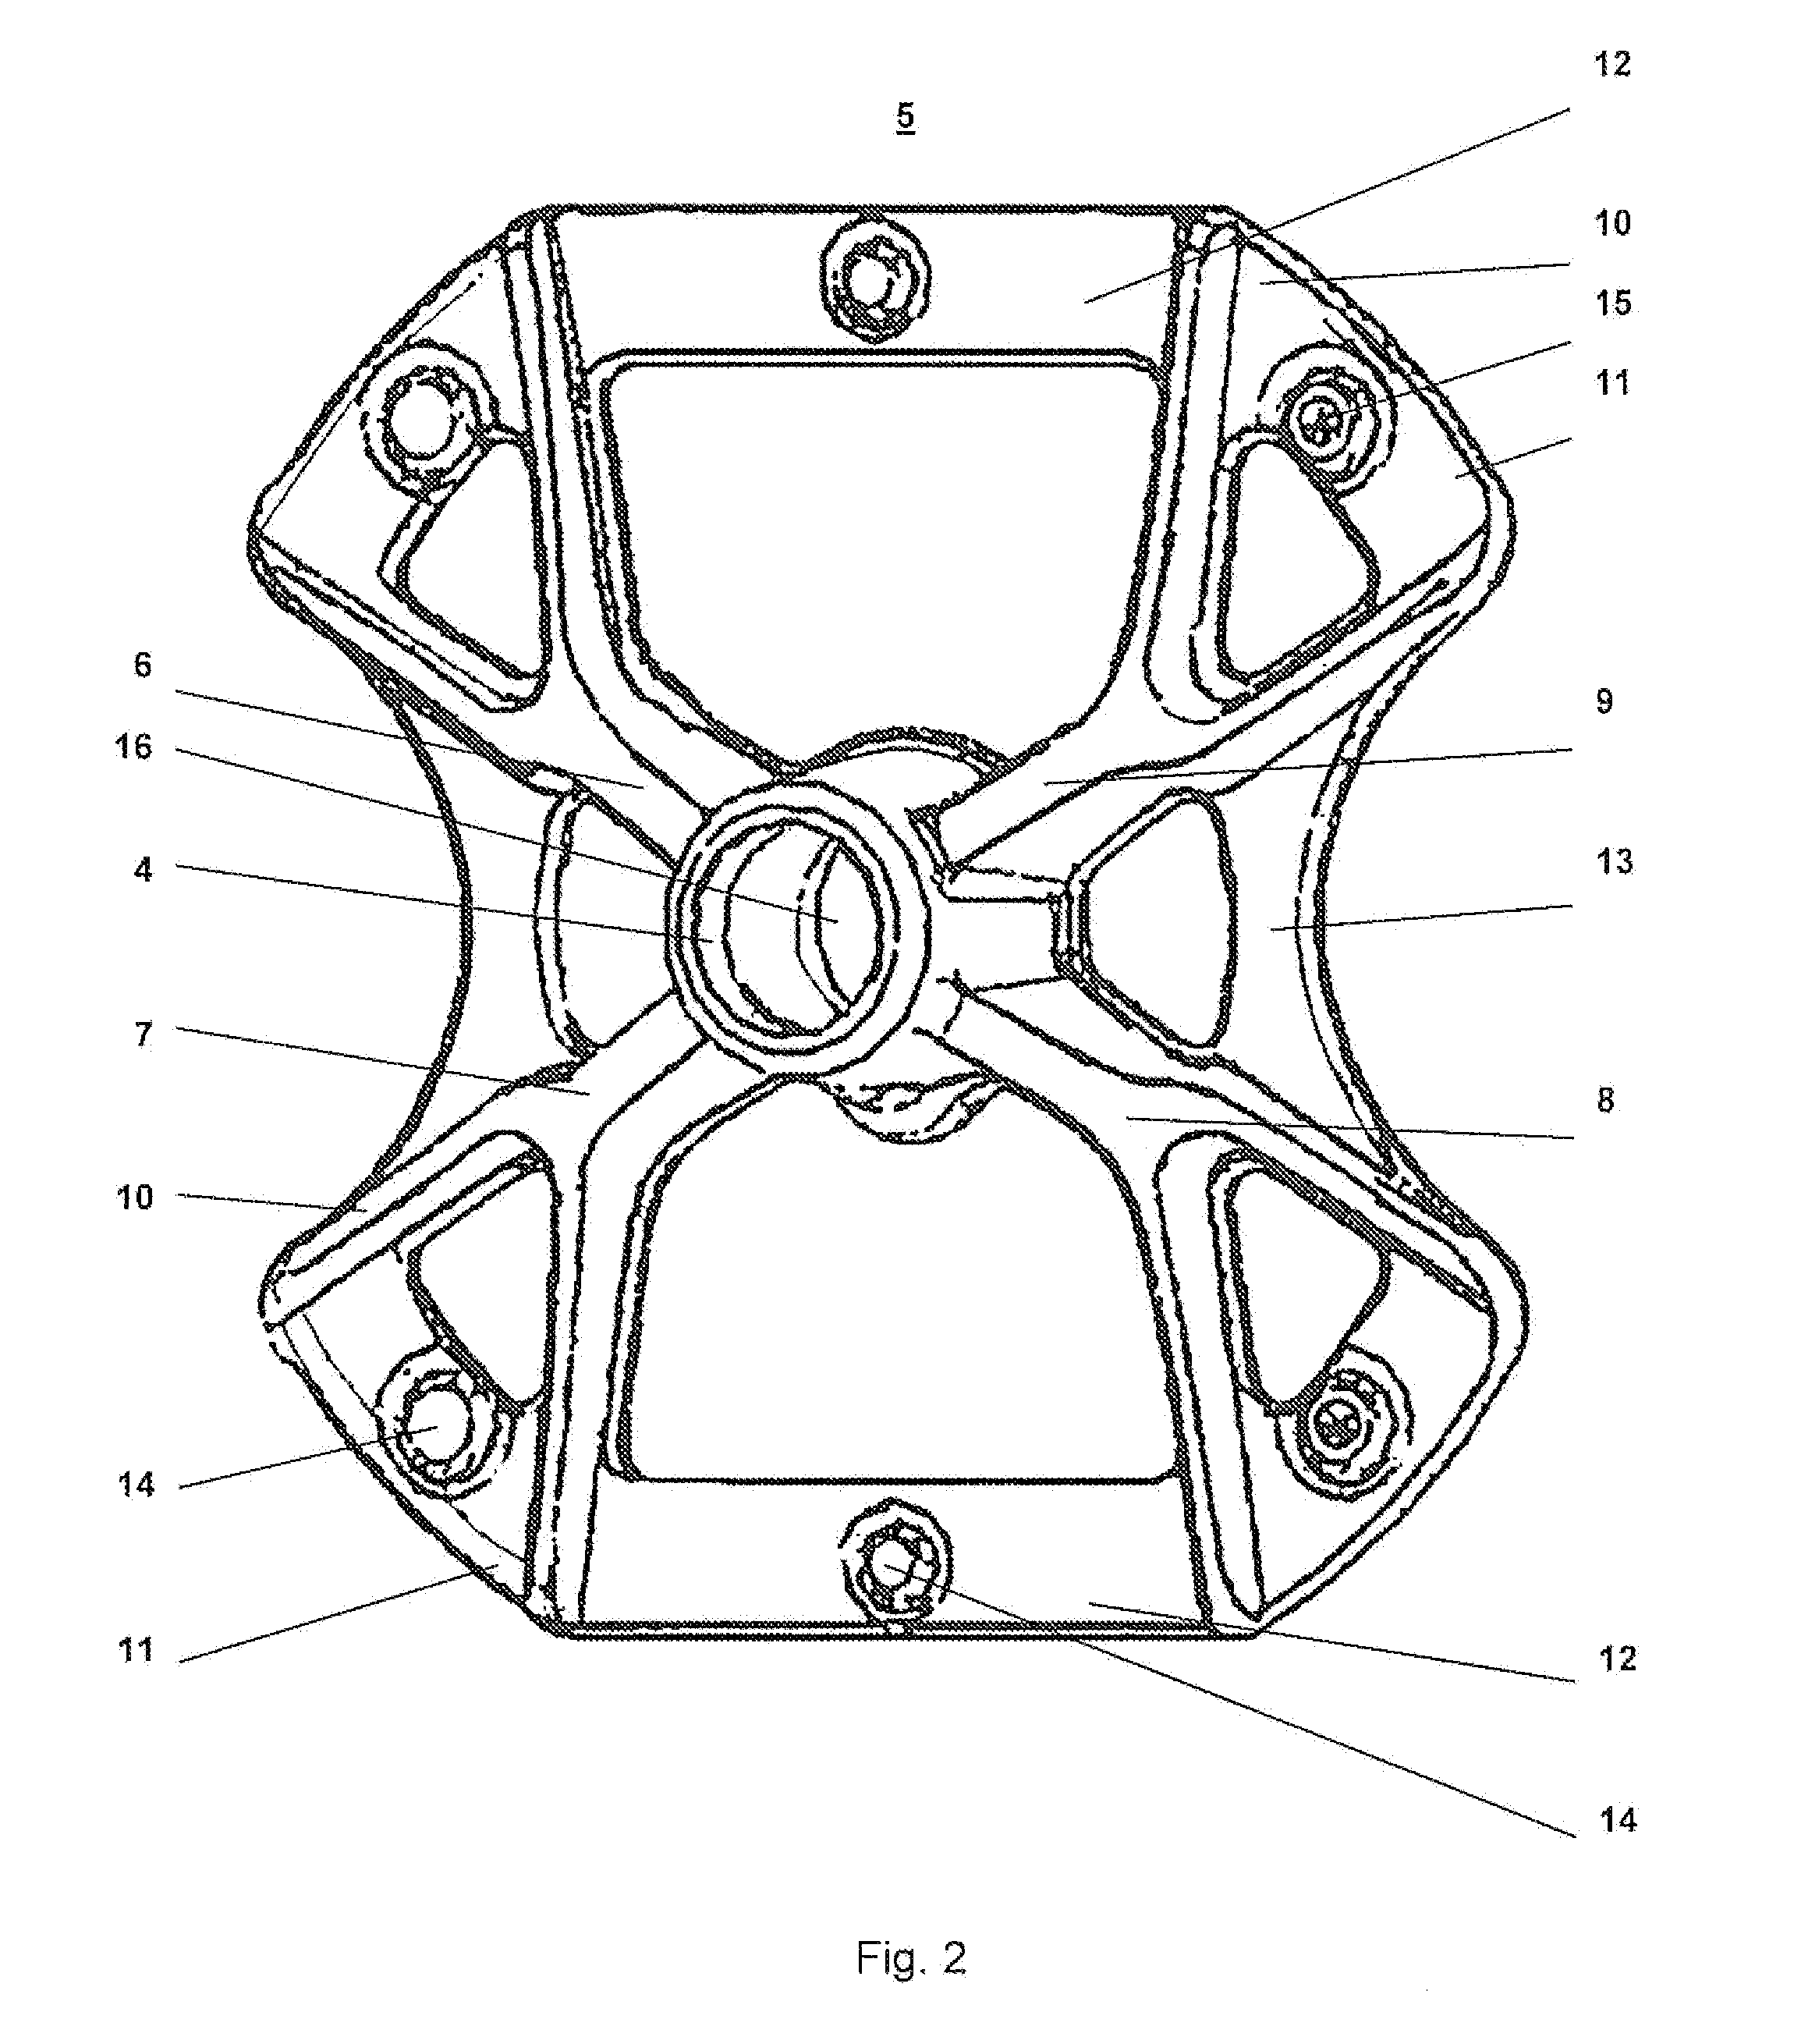 Aggregate for a washing machine with a plastic sudsing container